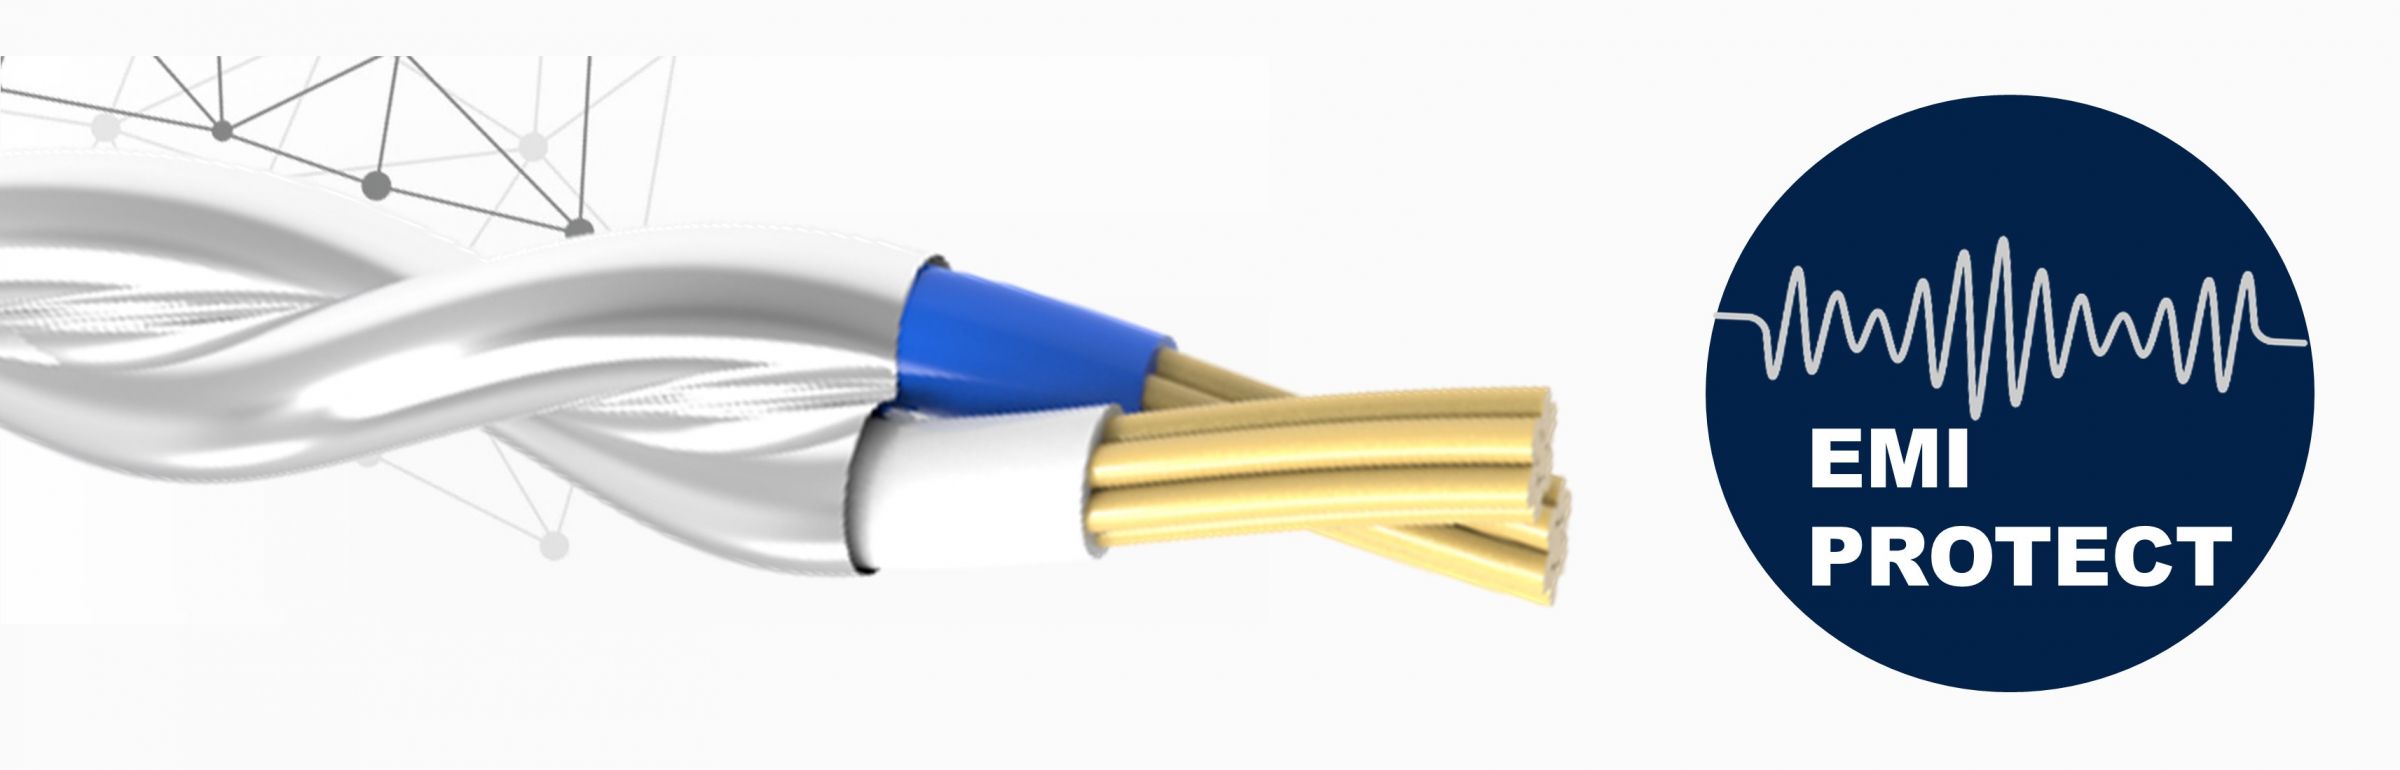 Cat8 STP 40G Patch Cable Specifications with Shielded Twisted Pair